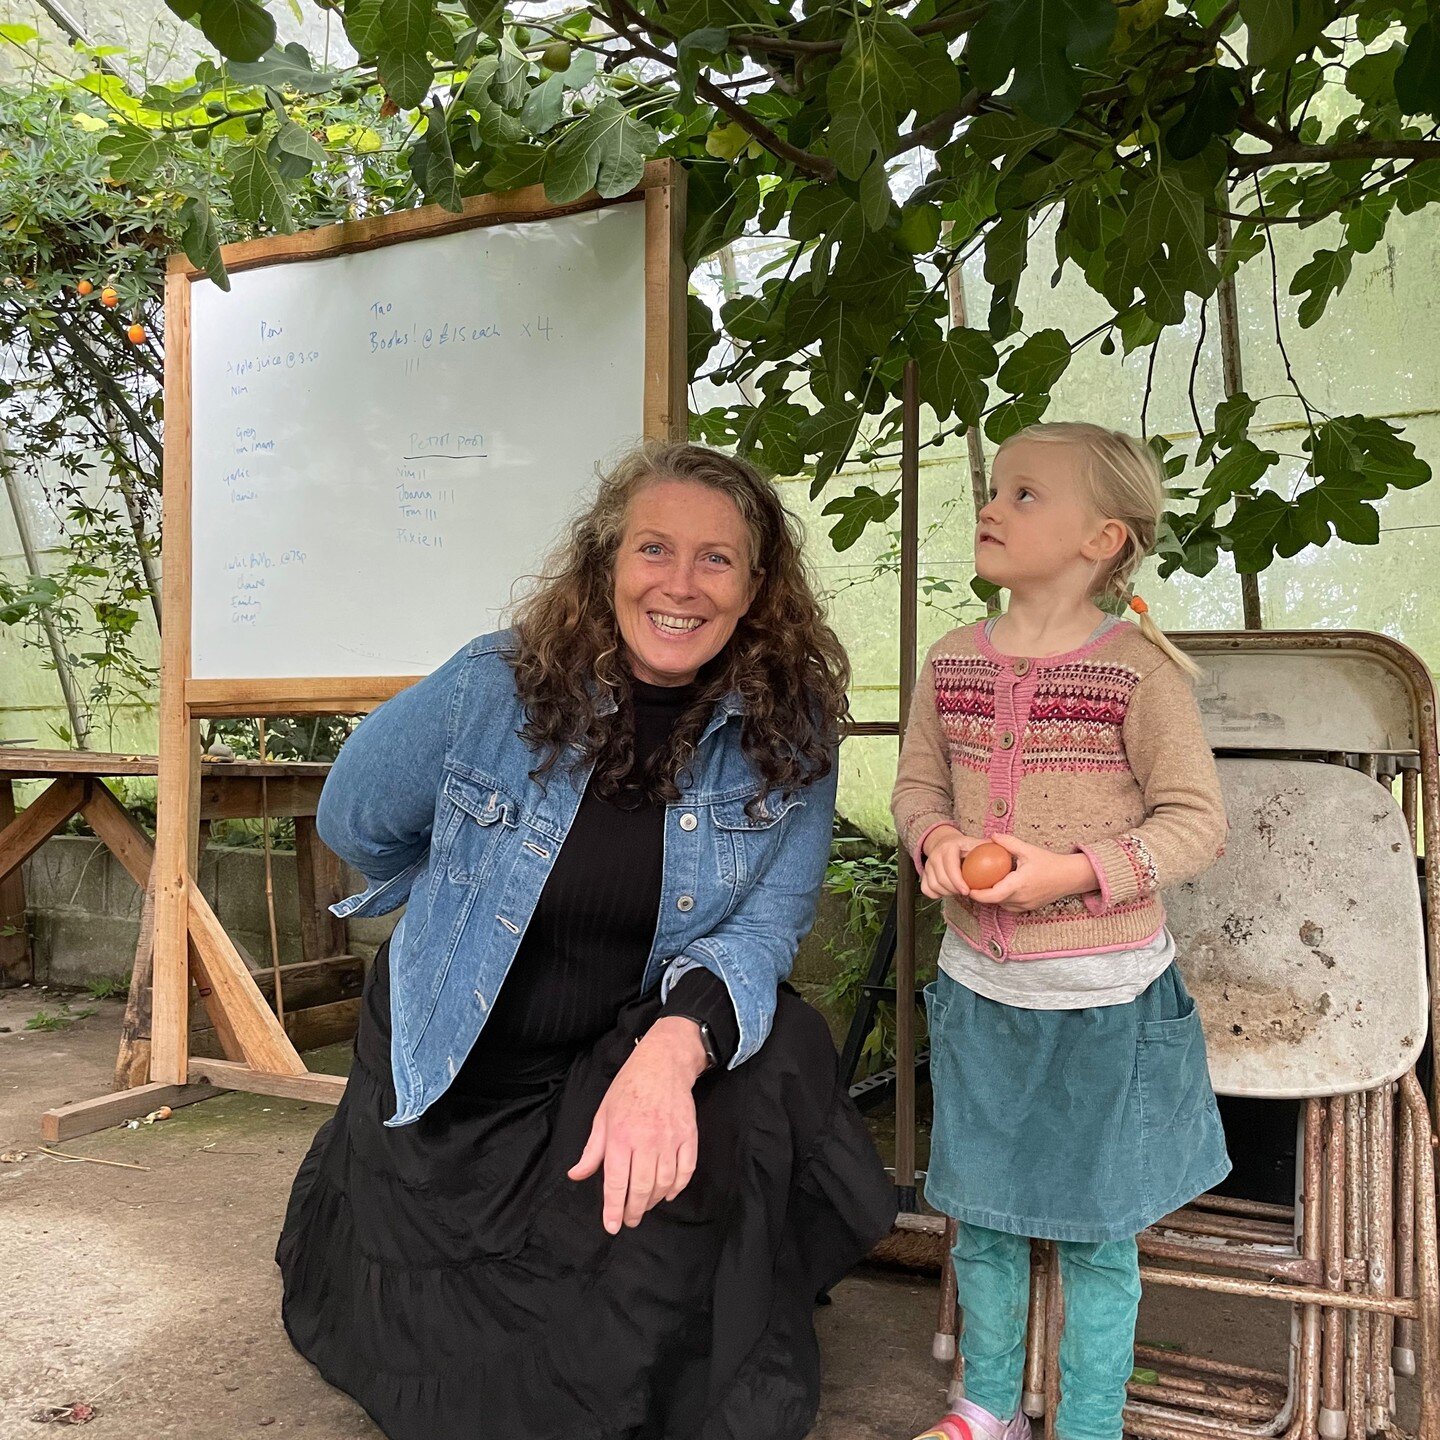 We had the pleasure of a visit from the wonderful Morag Gamble last week, global permaculture ambassador and founder of the @ethos.foundation and @permacultureeducationinstitute based in Australia. Anoush was incredibly excited to meet her too and lo